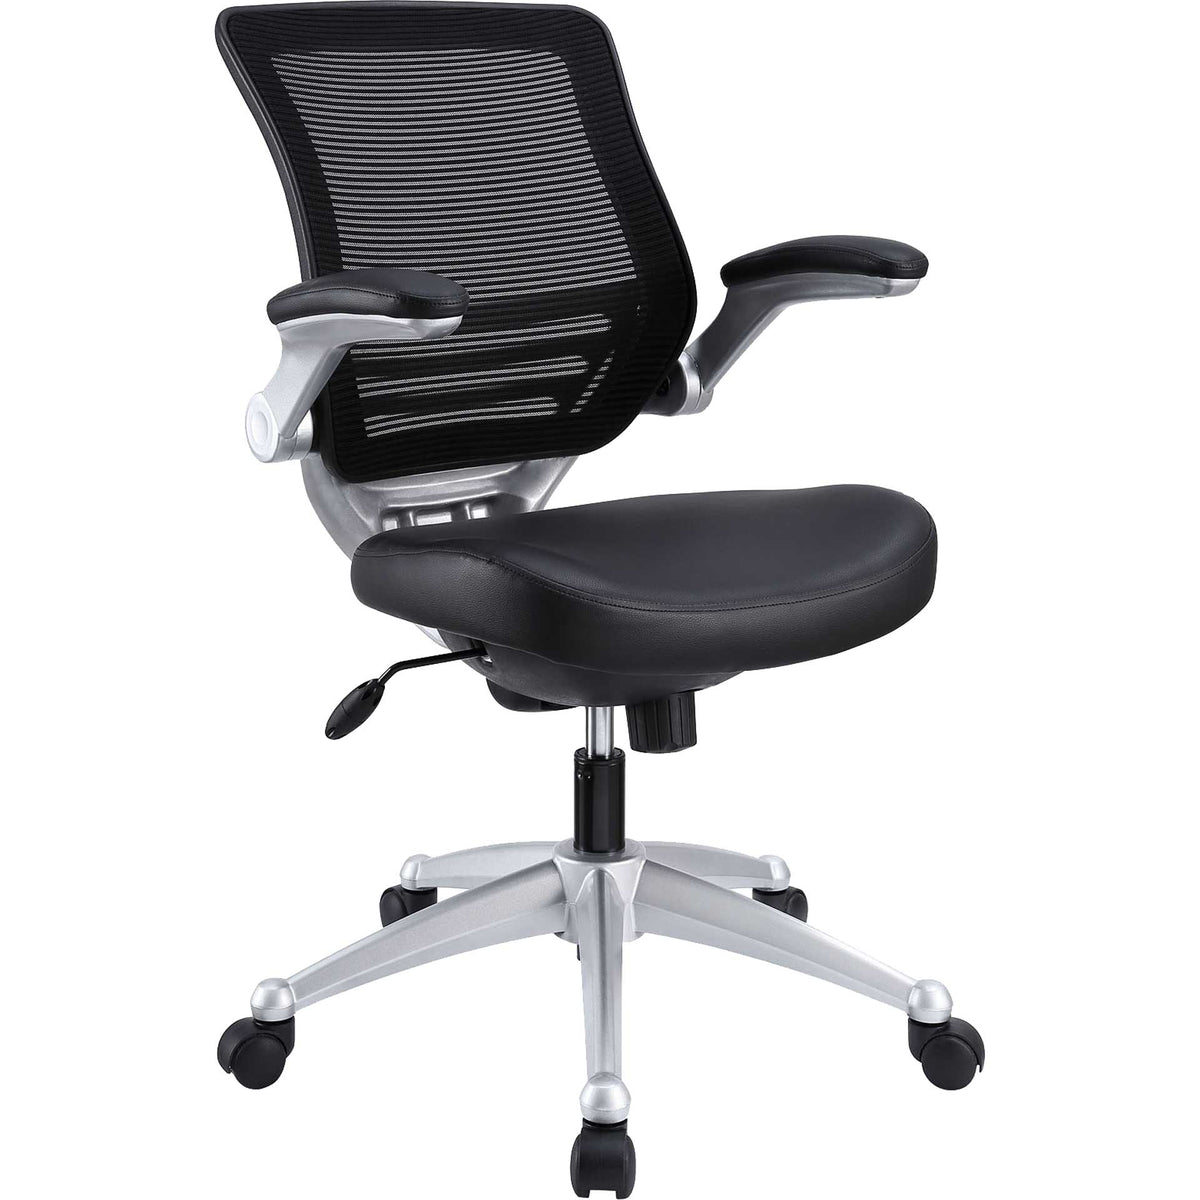 Eloise Leather Office Chair Black